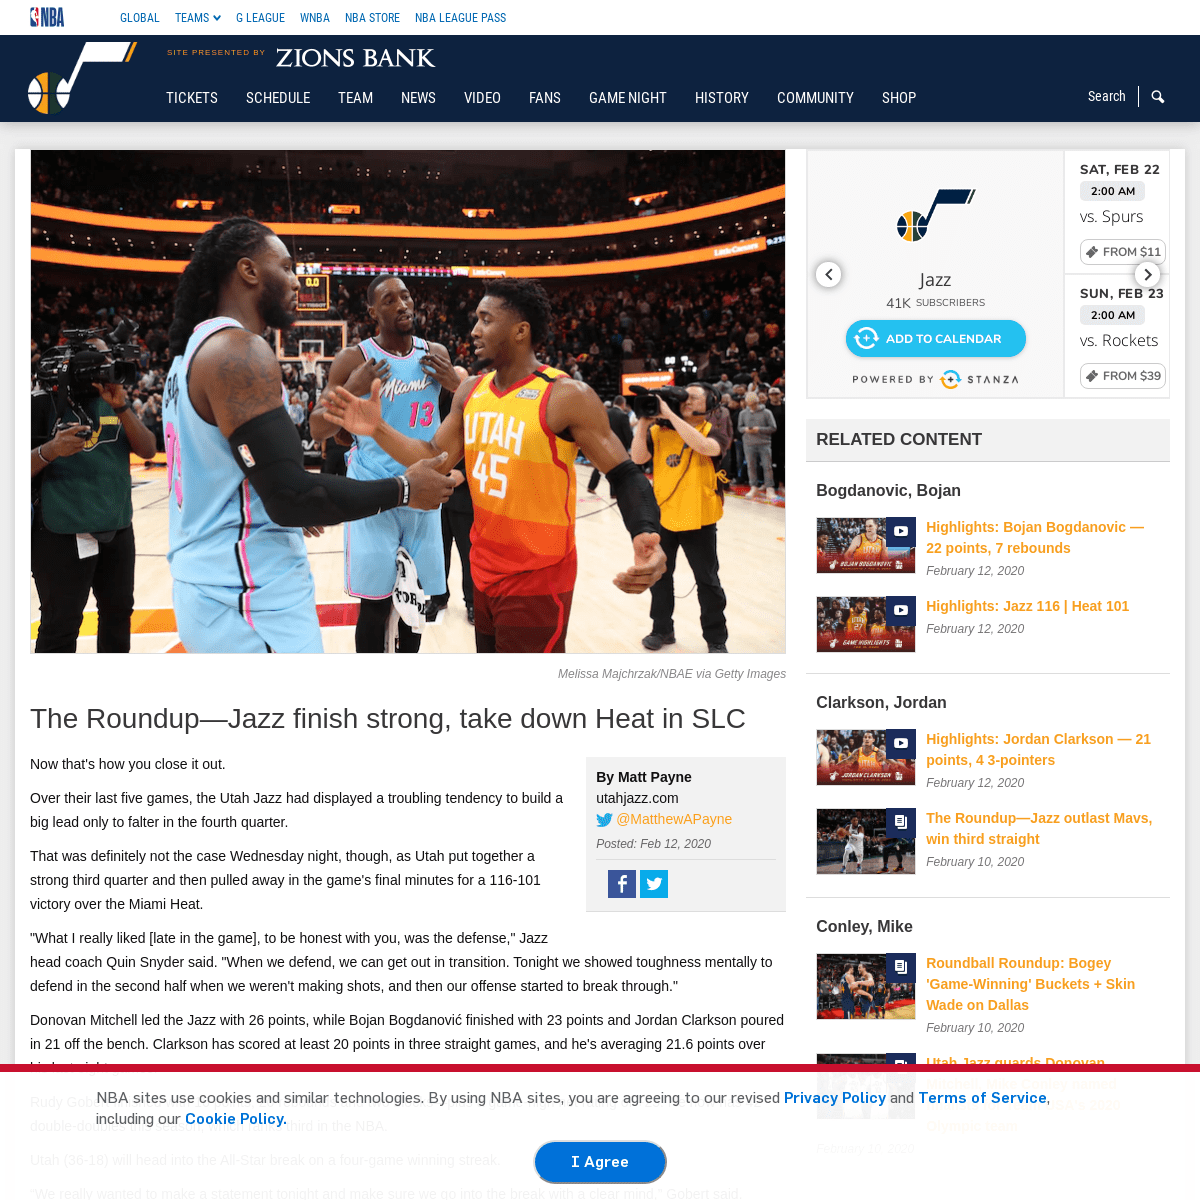 A complete backup of www.nba.com/jazz/news/roundup-jazz-finish-strong-take-down-heat-slc